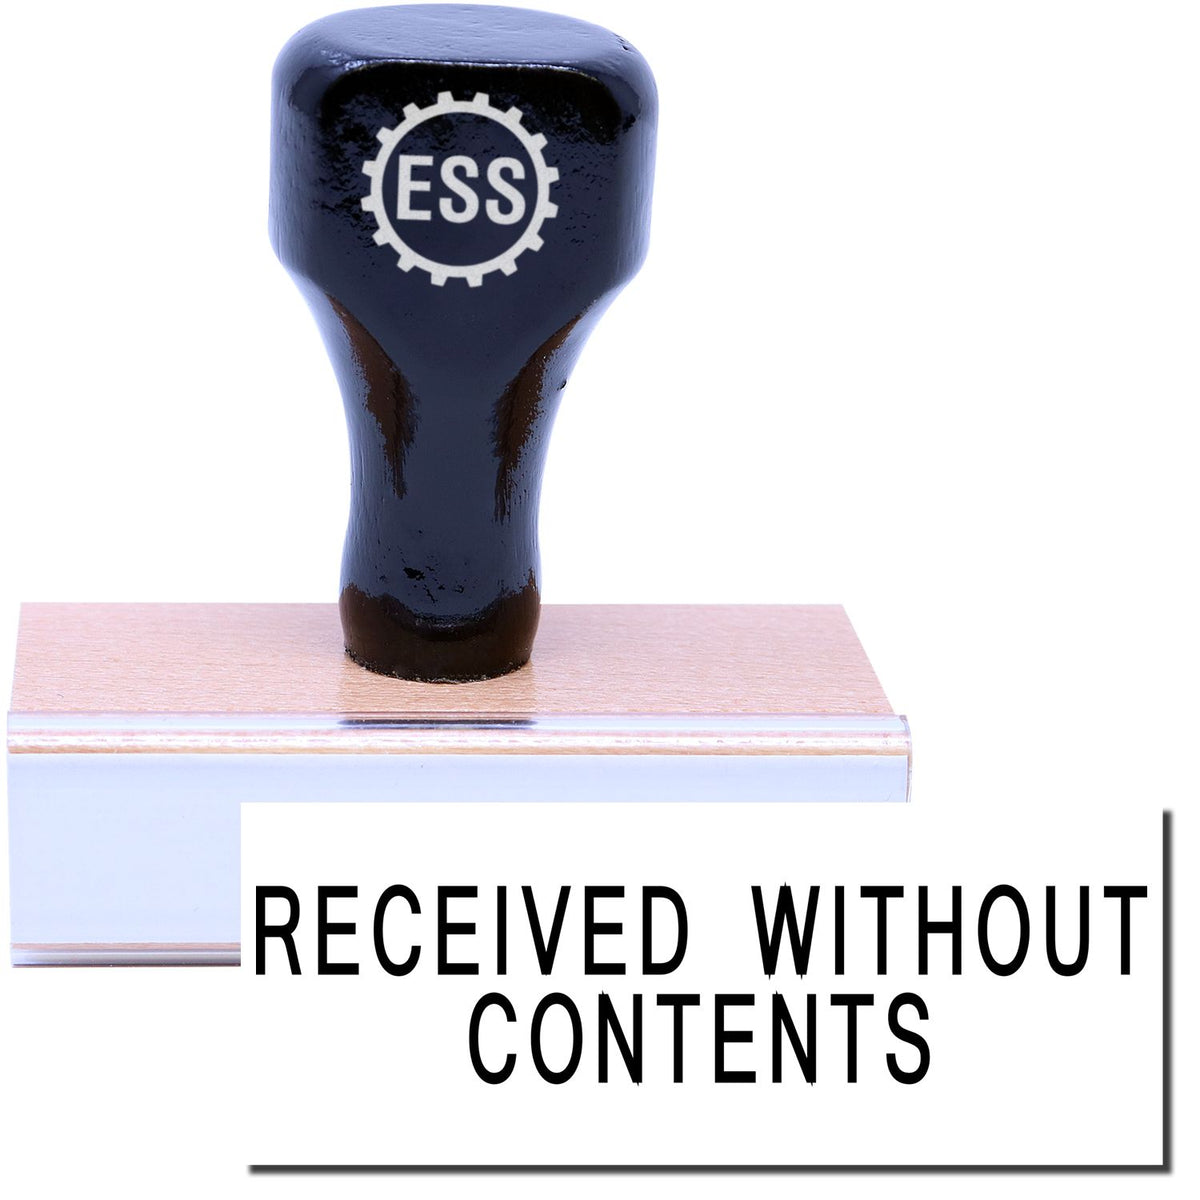 A stock office rubber stamp with a stamped image showing how the text &quot;RECEIVED WITHOUT CONTENTS&quot; in a large font is displayed after stamping.